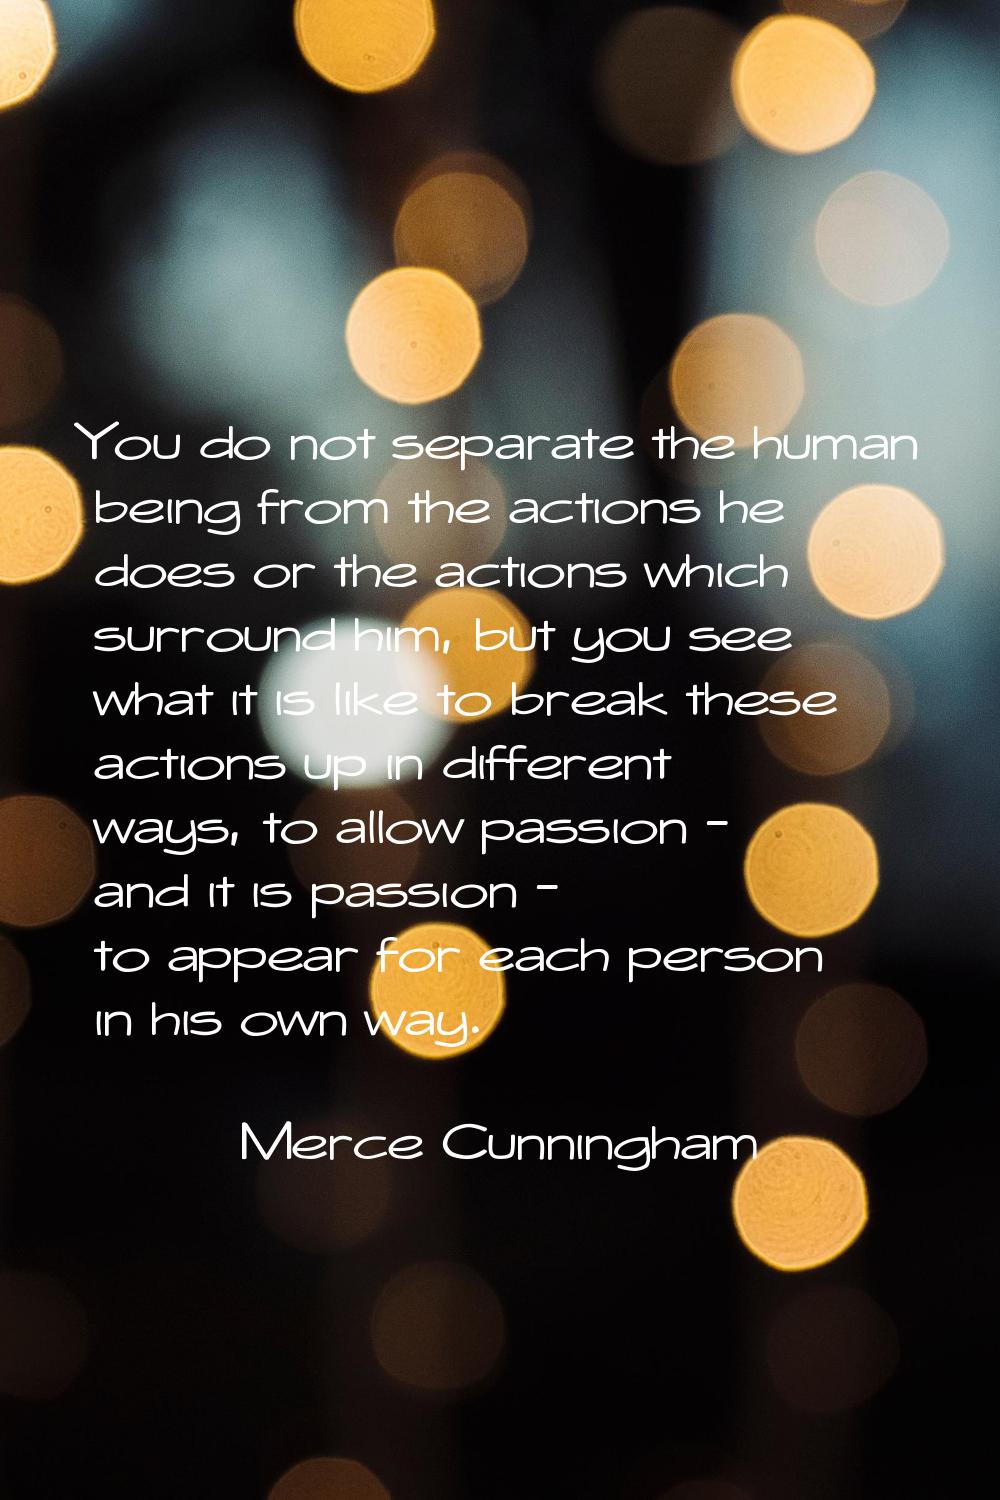 You do not separate the human being from the actions he does or the actions which surround him, but